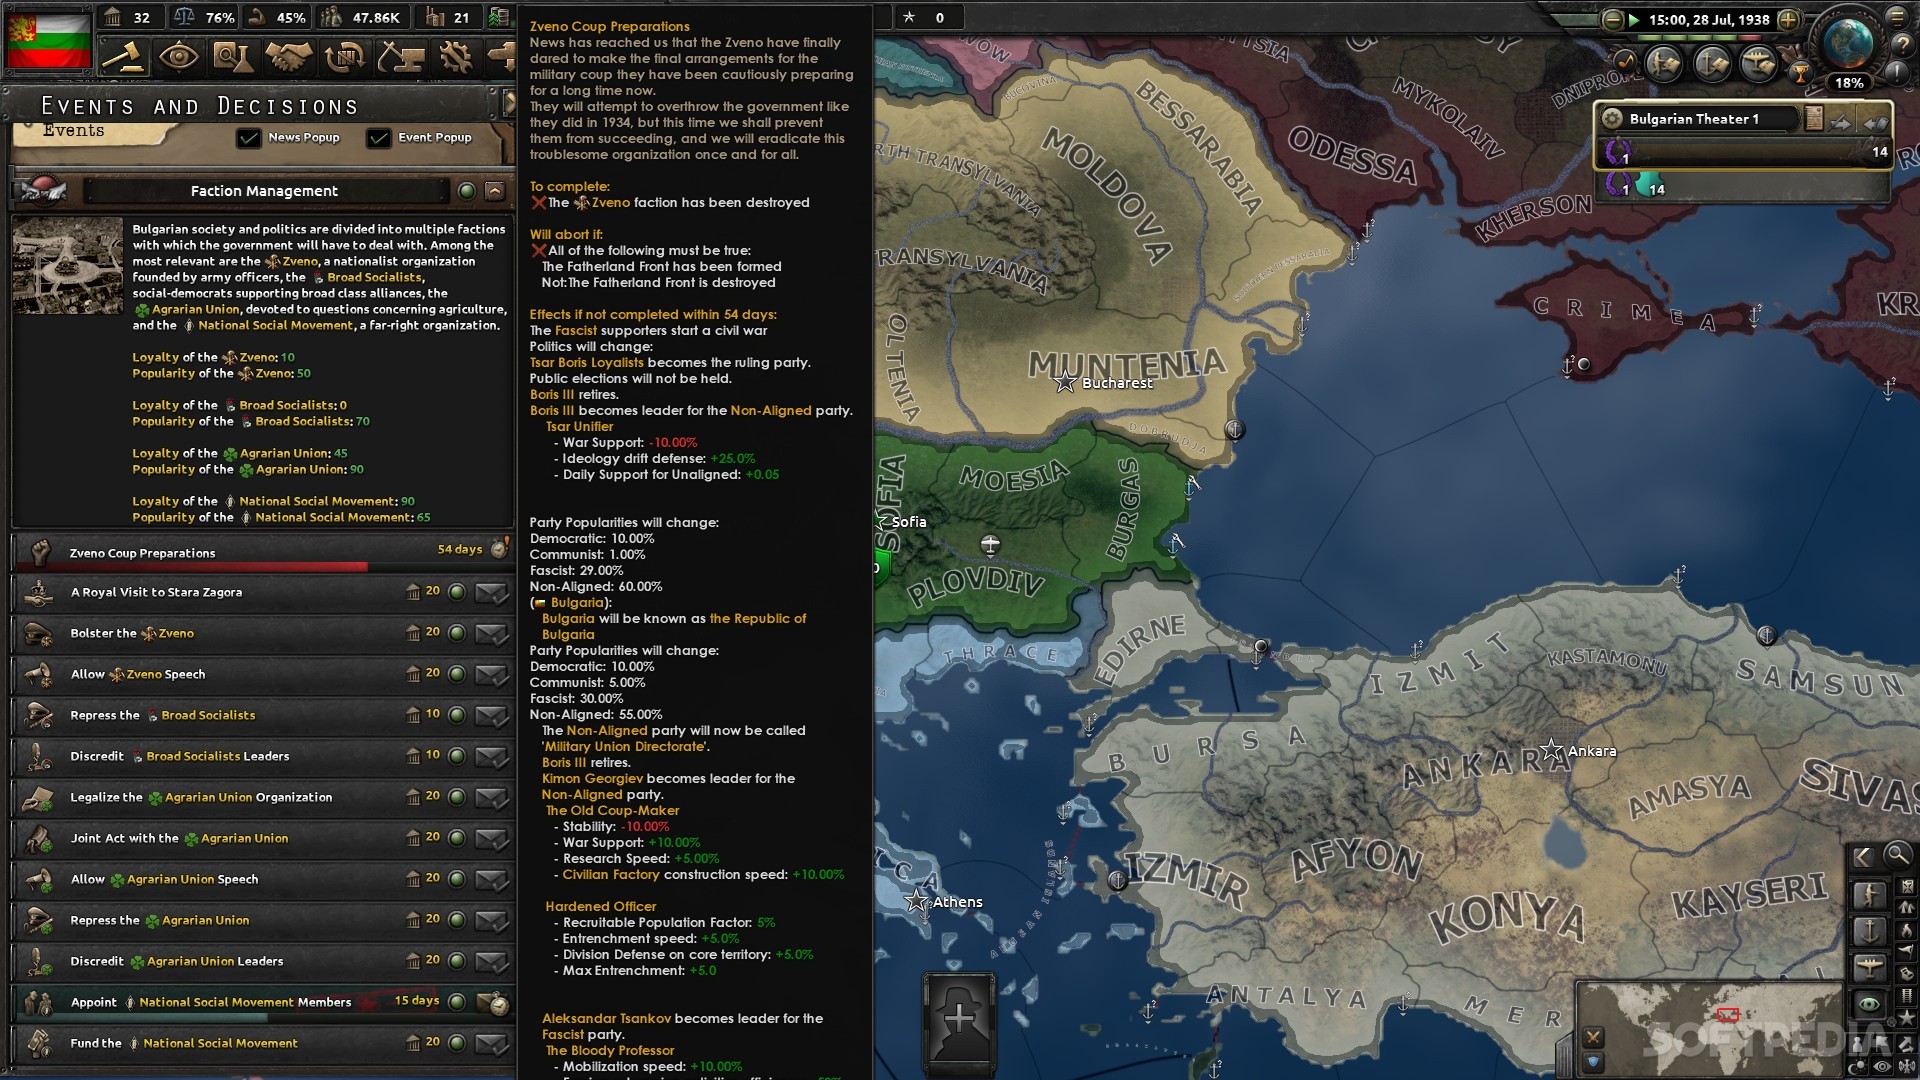 hearts of iron 4 decisions